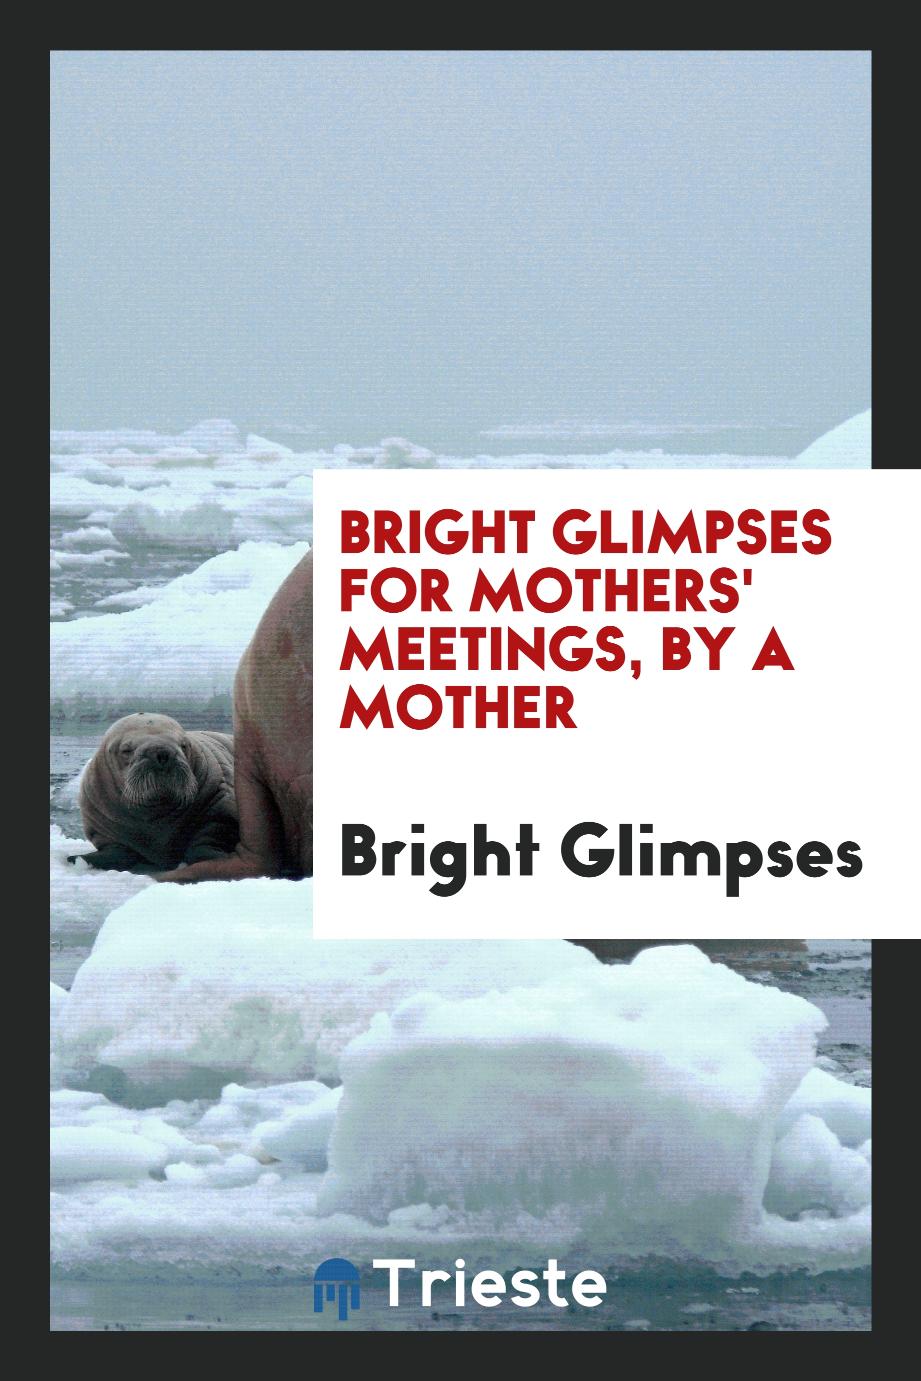 Bright Glimpses for Mothers' Meetings, by a Mother